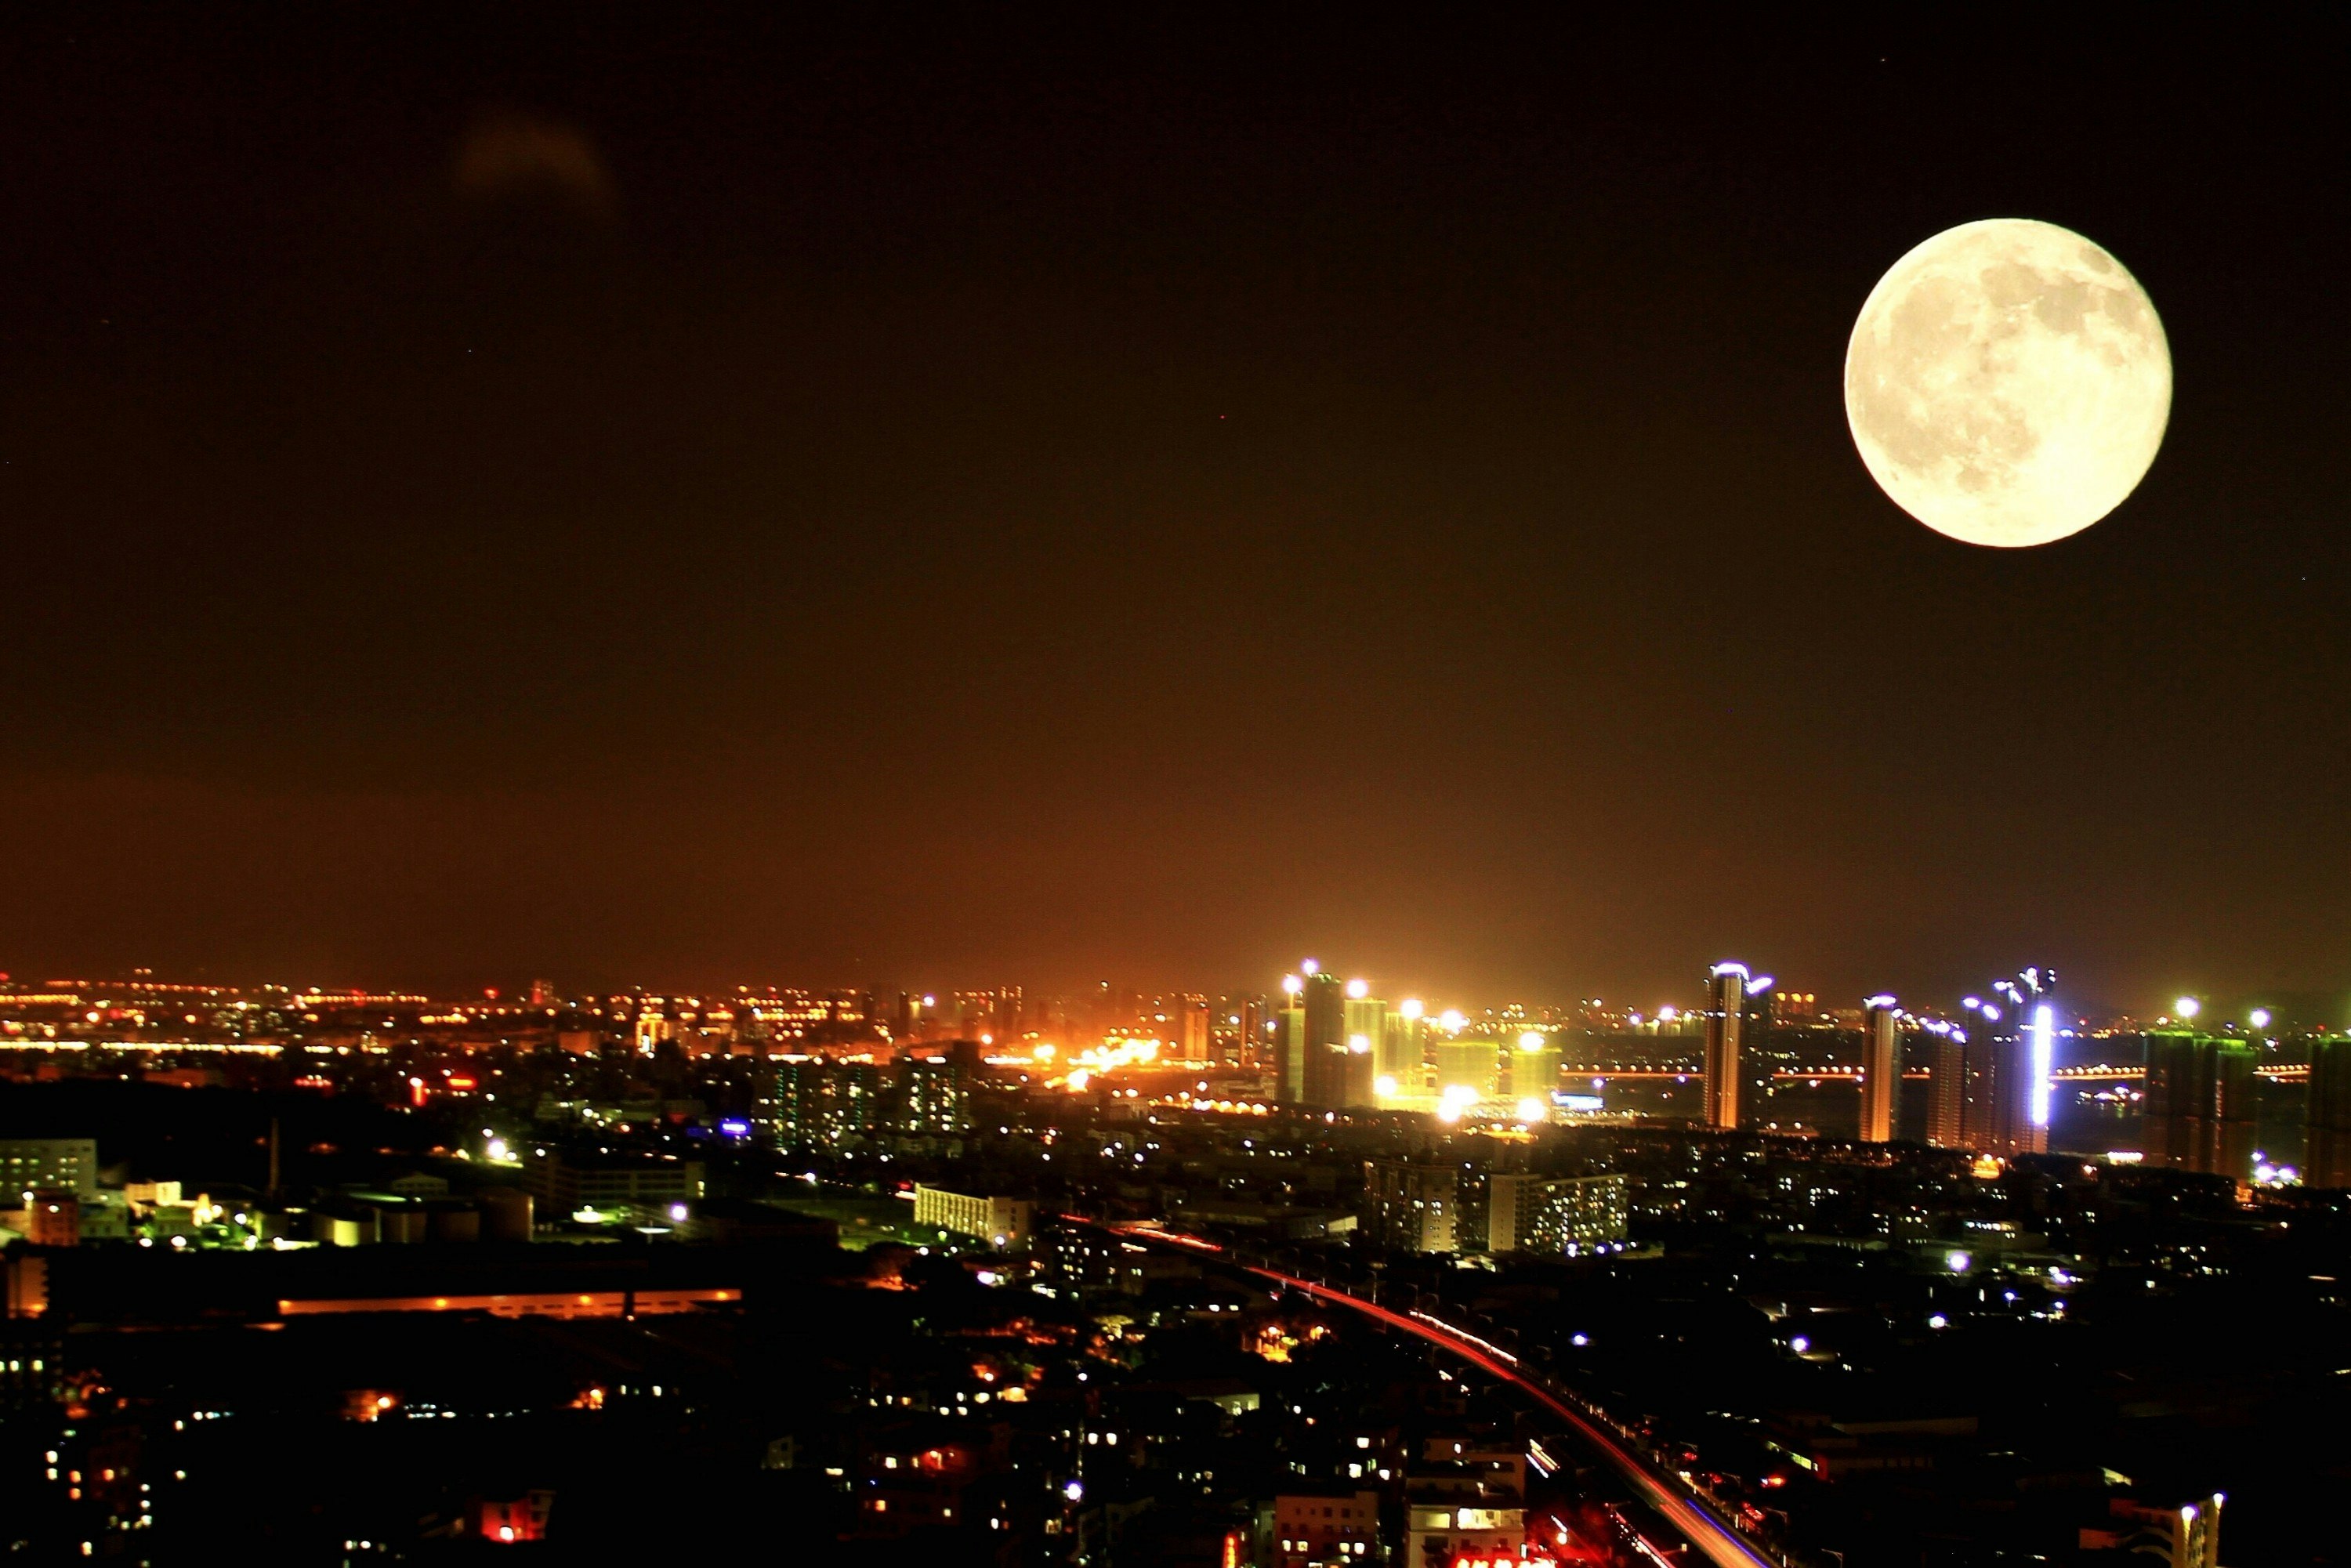 A full moon over a city at night.